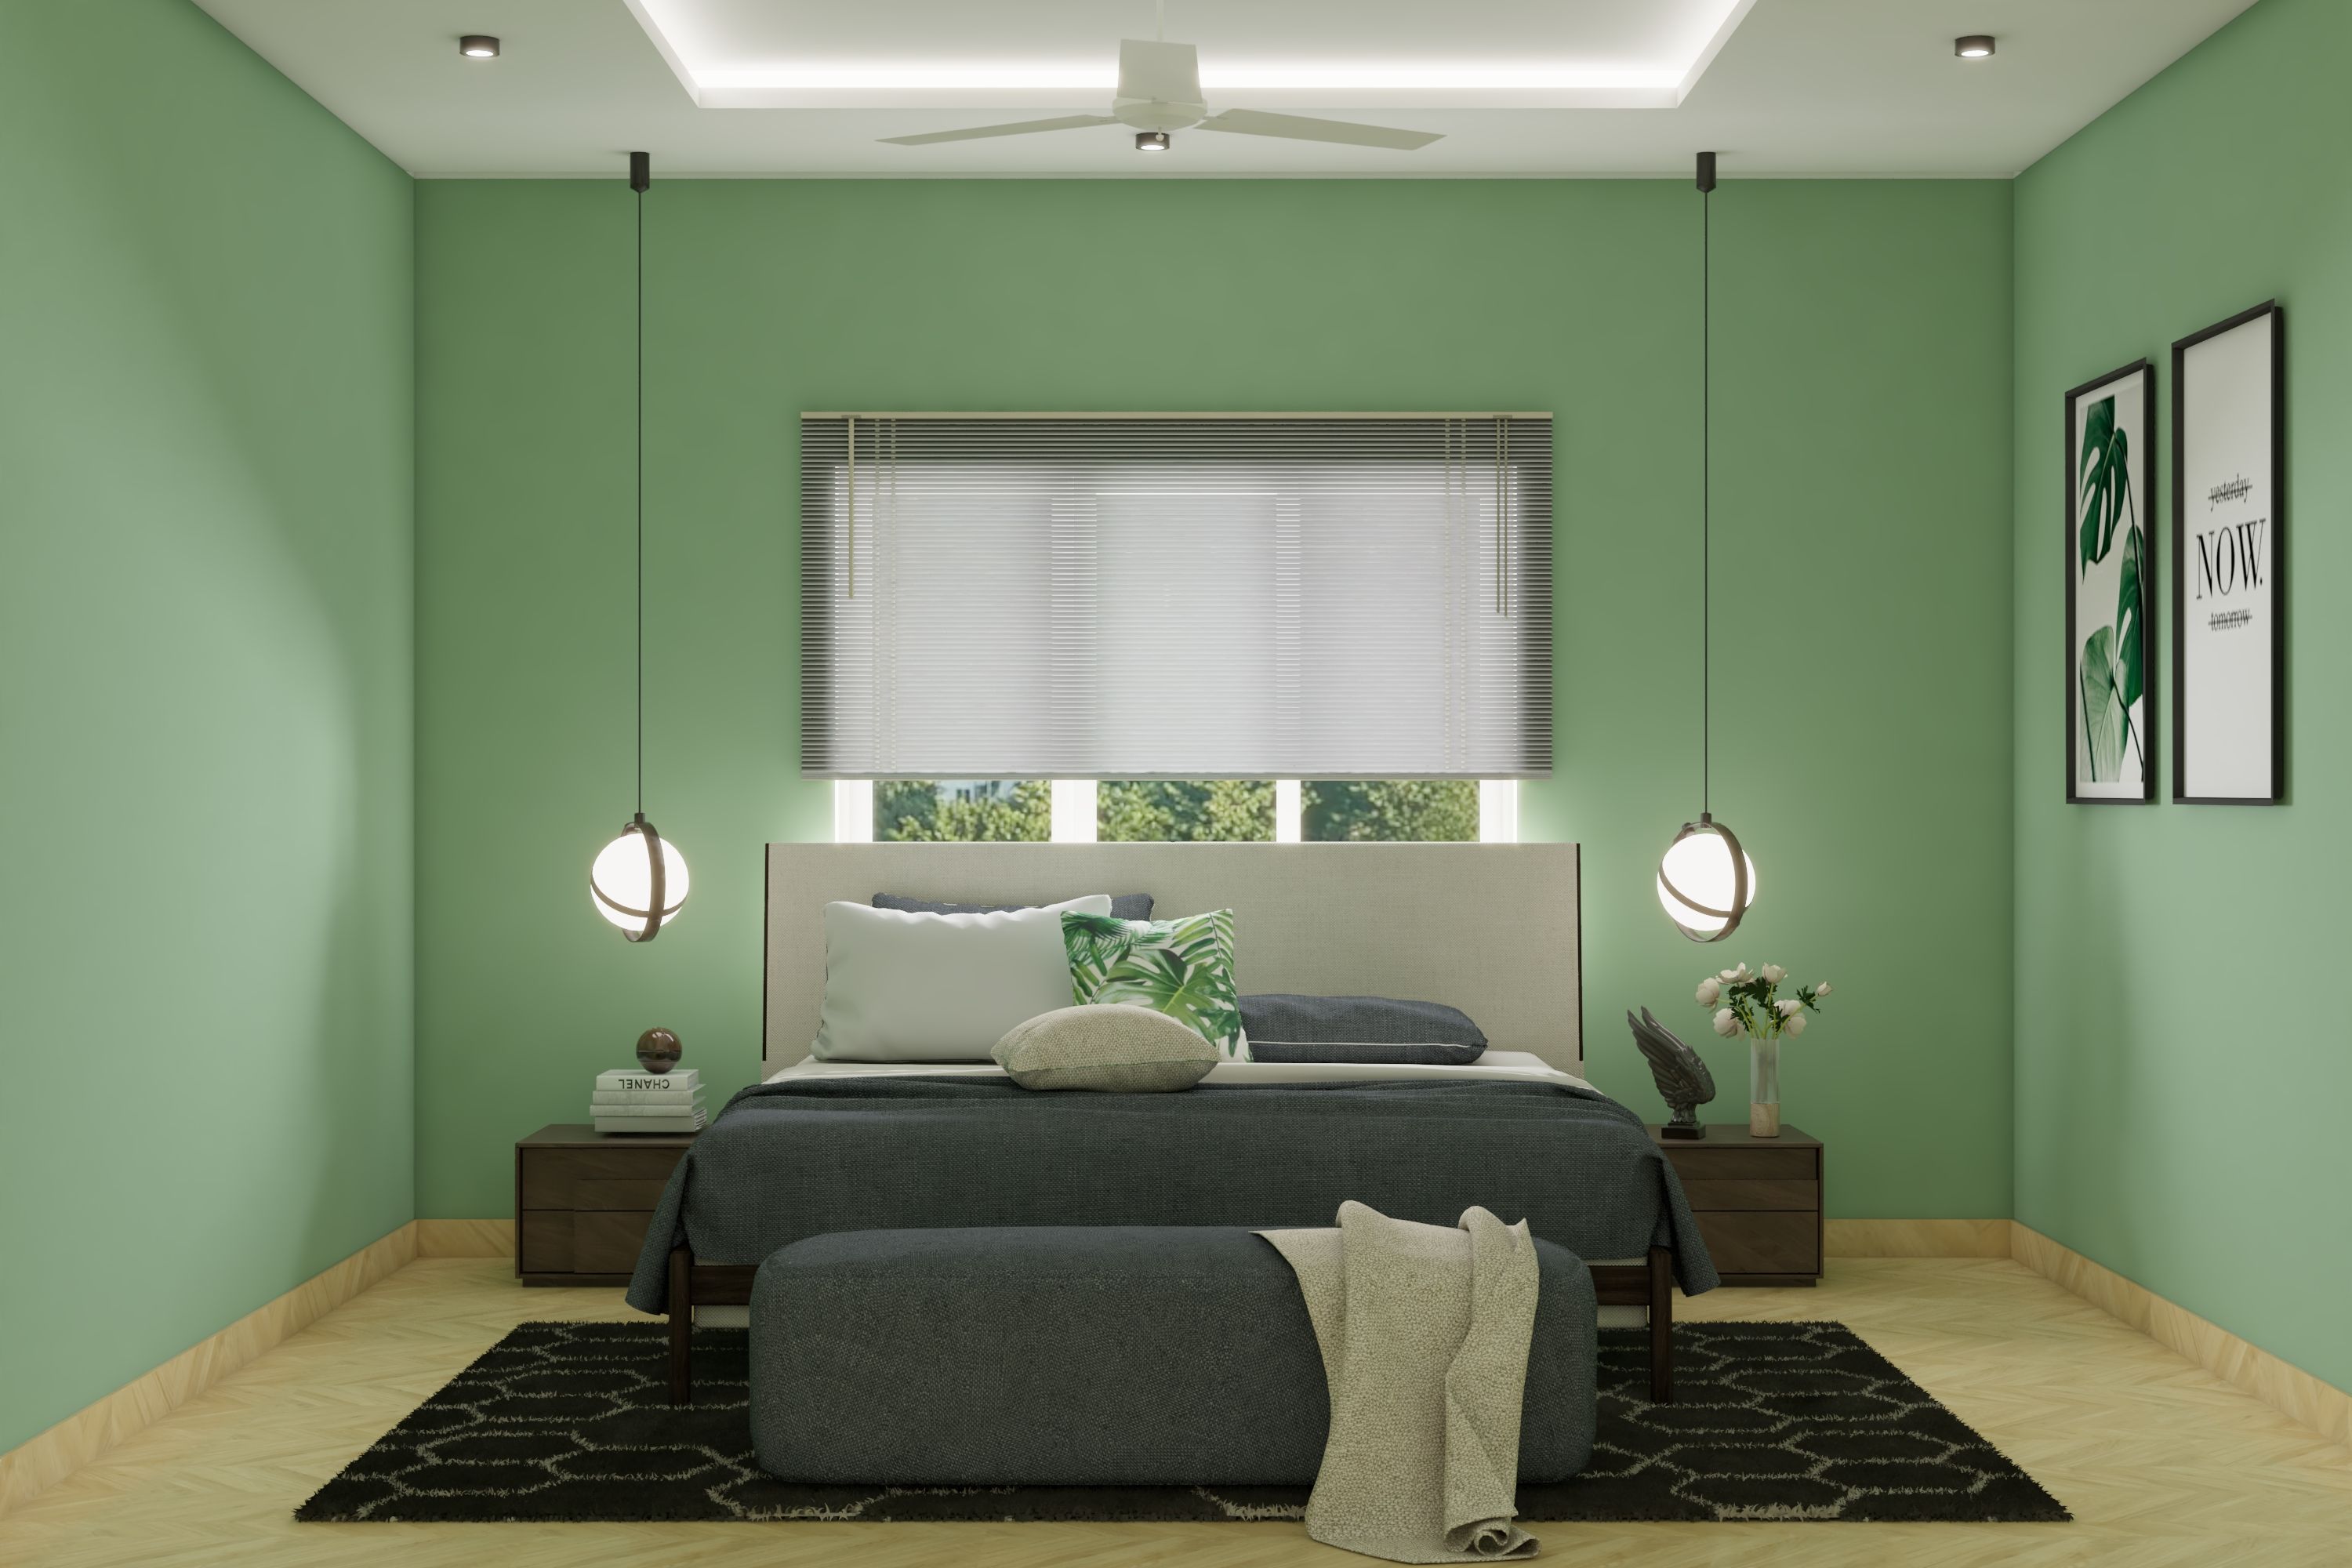 Contemporary Bedroom Design with Soothing Green Walls and Ambient ...